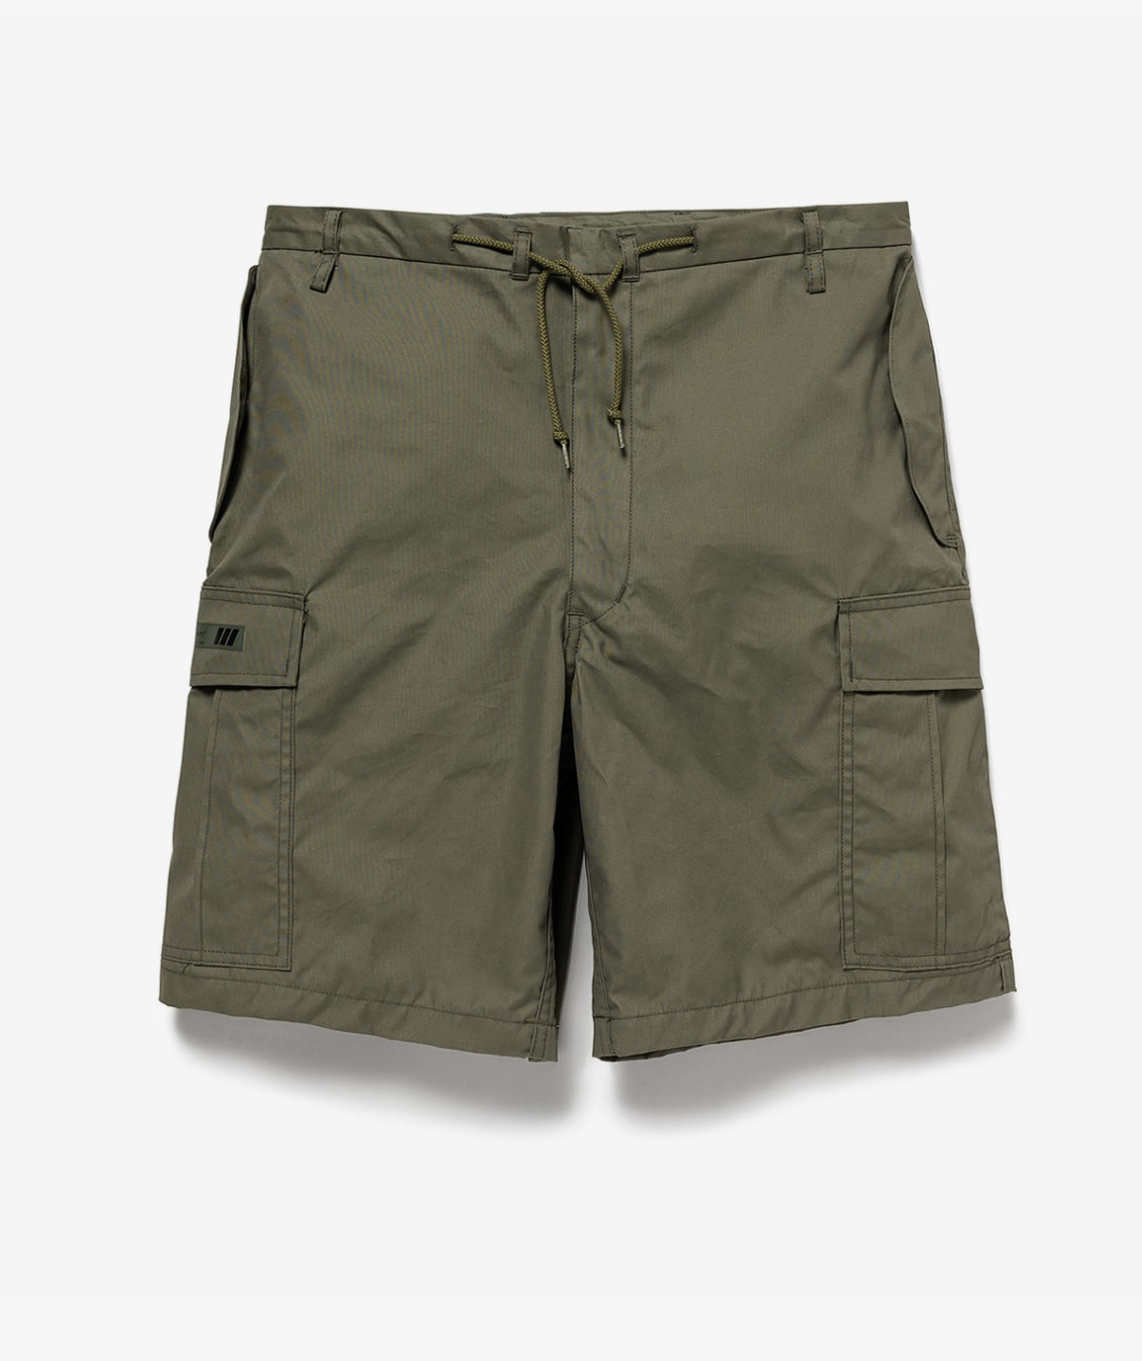 WTAPS 231WVDT-PTM06 MILS0001 / SHORTS / NYCO. OXFORD